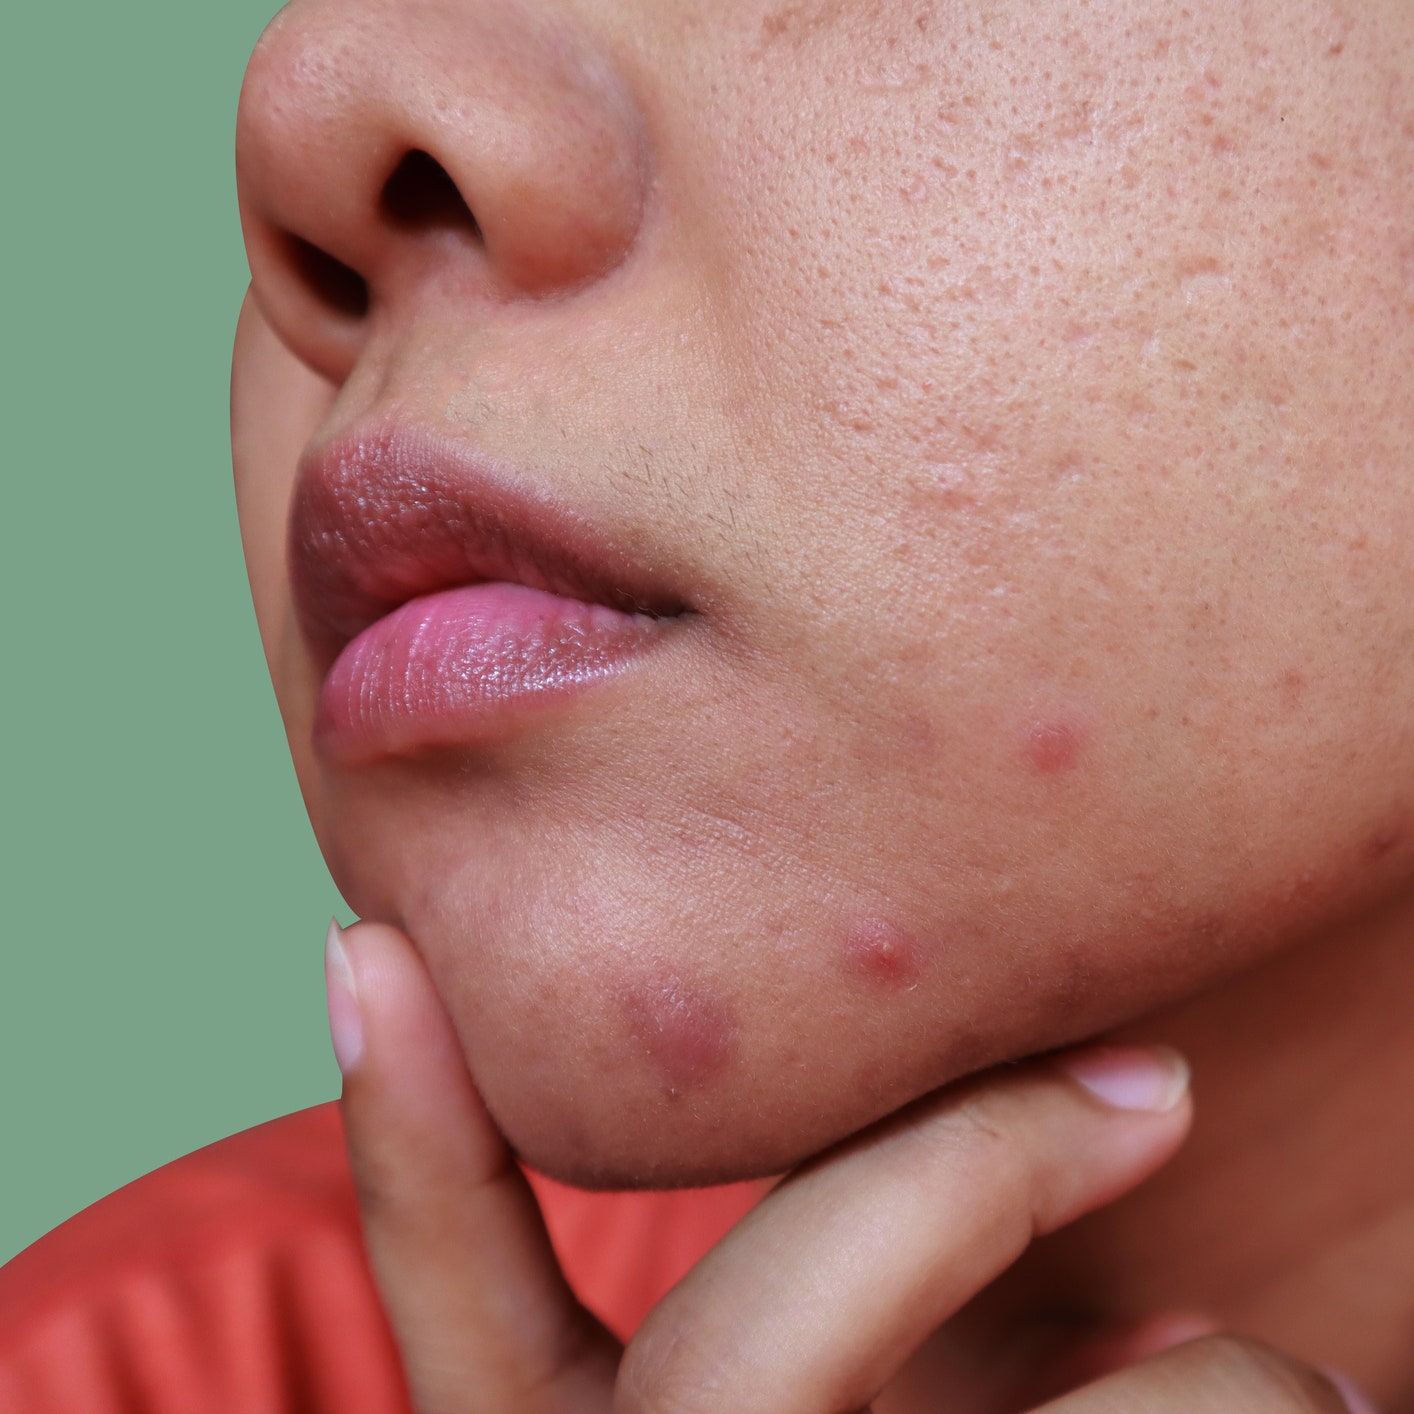 I’m a Grown-Ass Adult&-Why Is Chin Acne Still Ruining My Life?